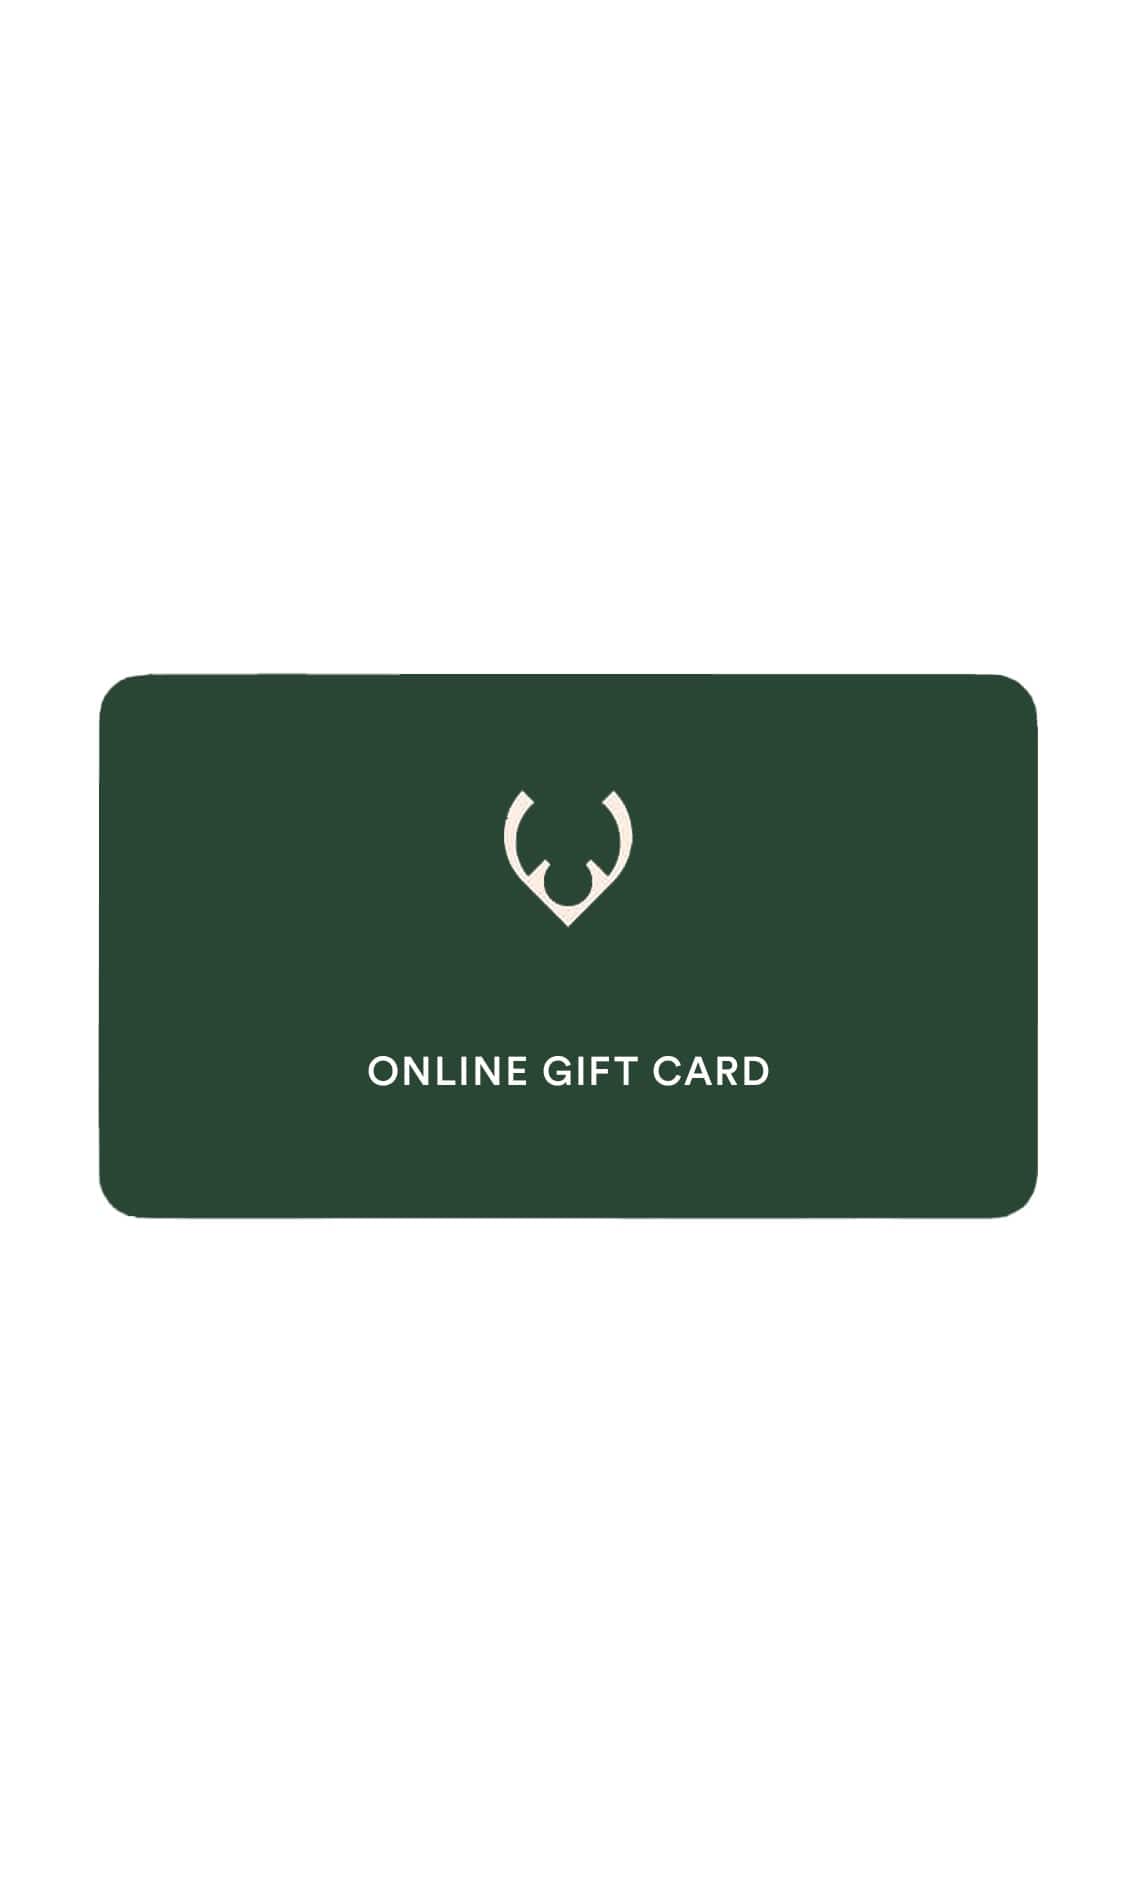 Gift Voucher Template Can Be Use Stock Illustration 2321206703 |  Shutterstock